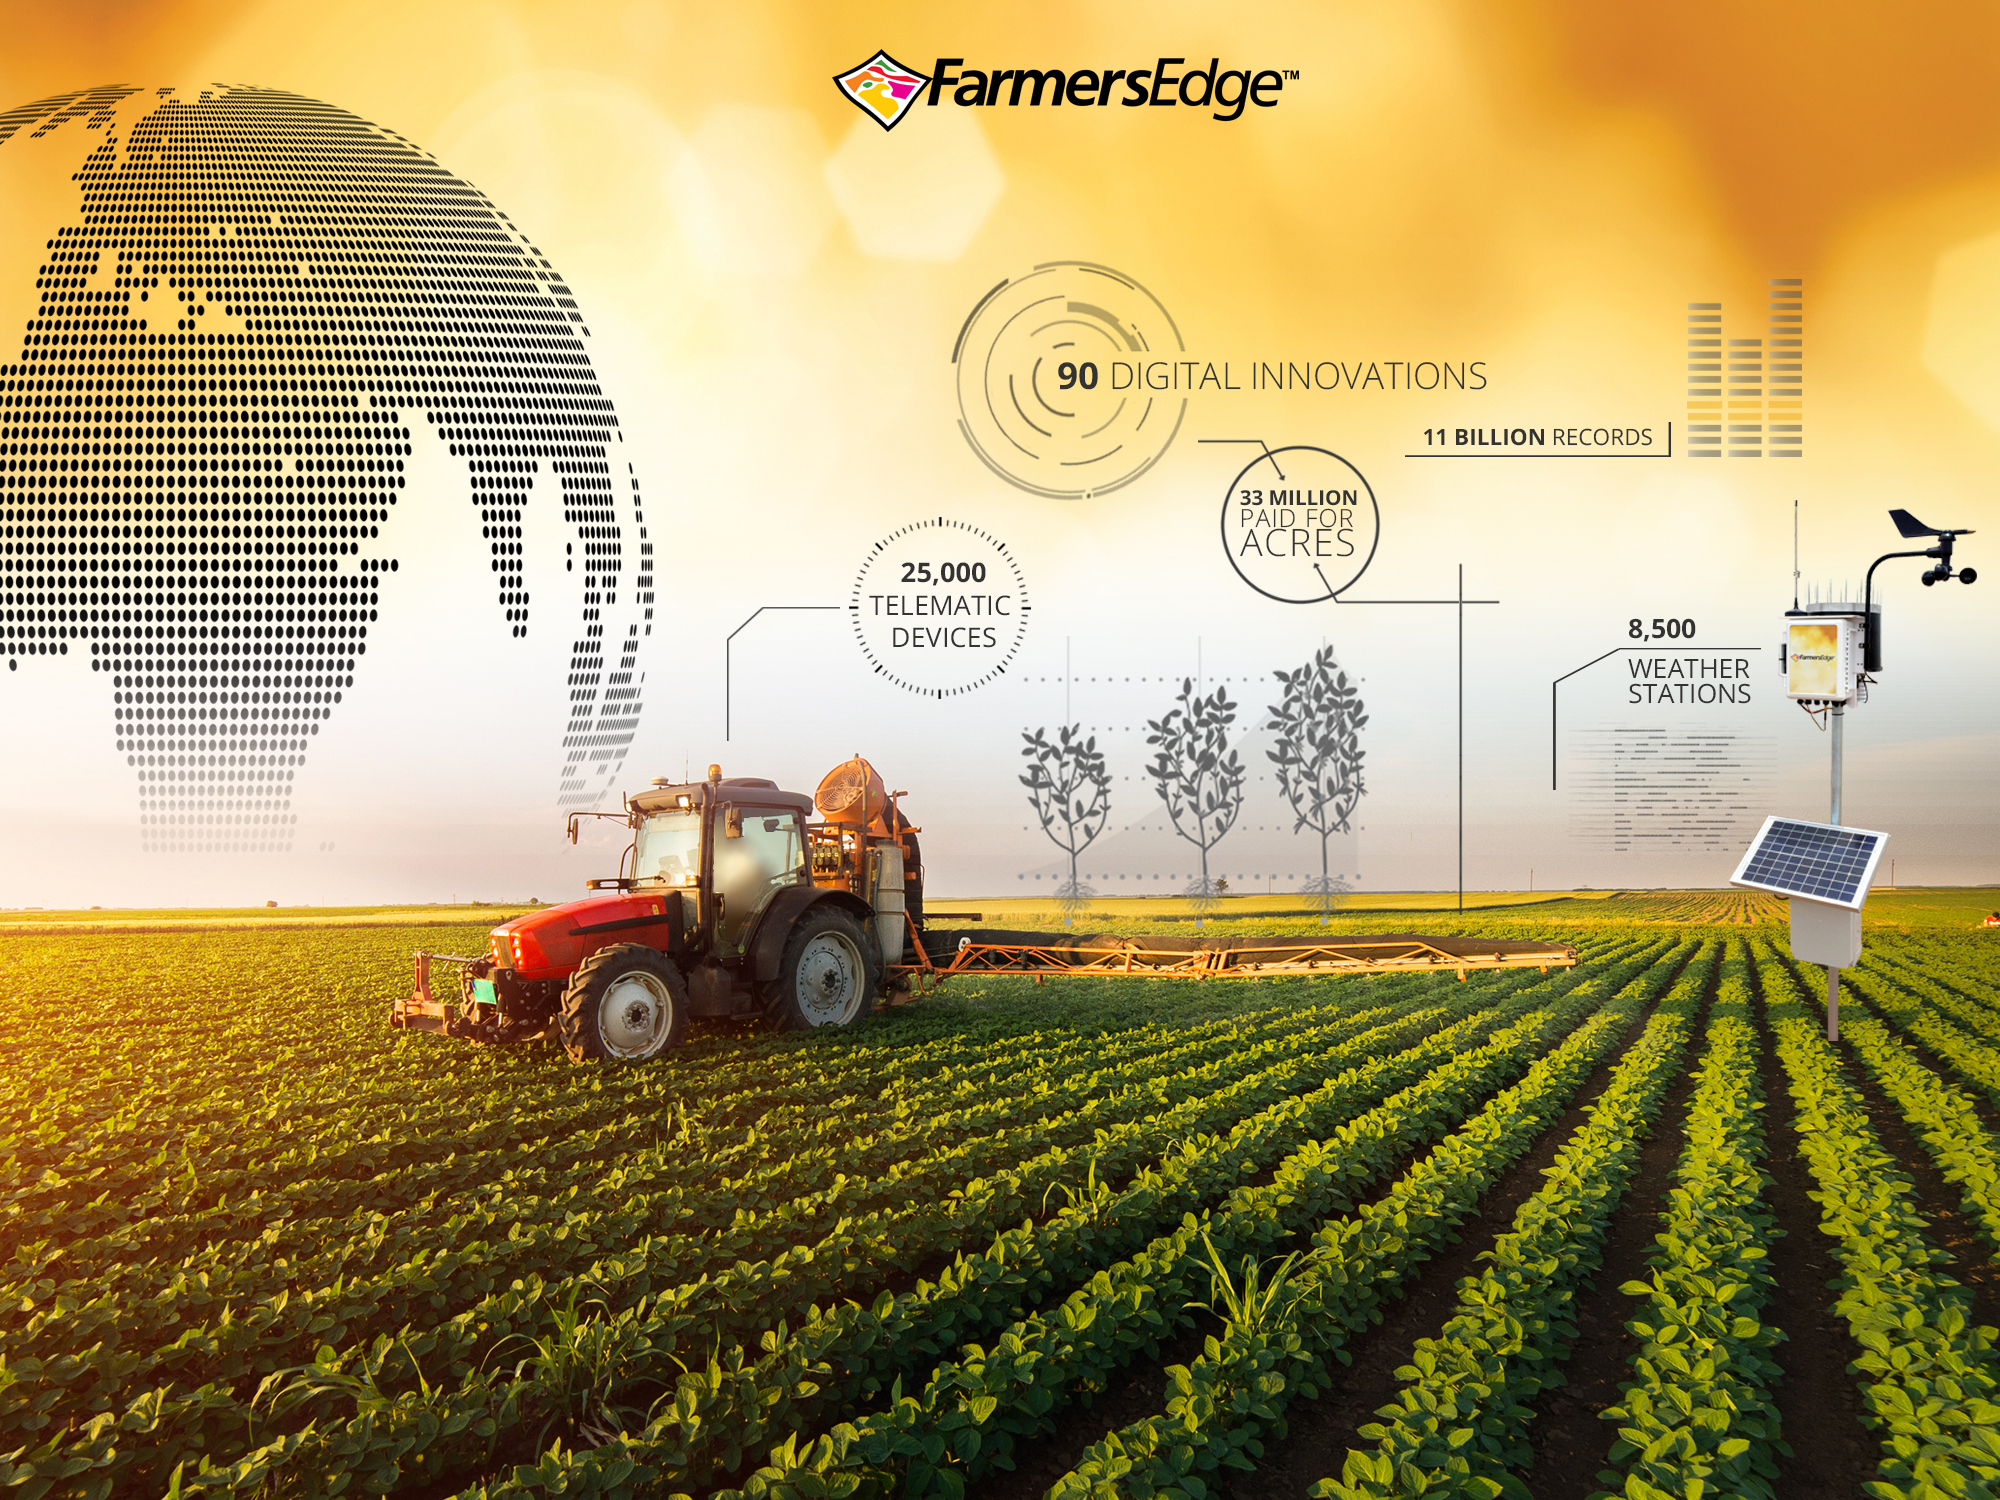 Farmers Edge™ Releases Comprehensive 2018 R&D Roadmap with Over 90 New Digital Agricultural Innovations Focusing on Data-Driven Decision Support